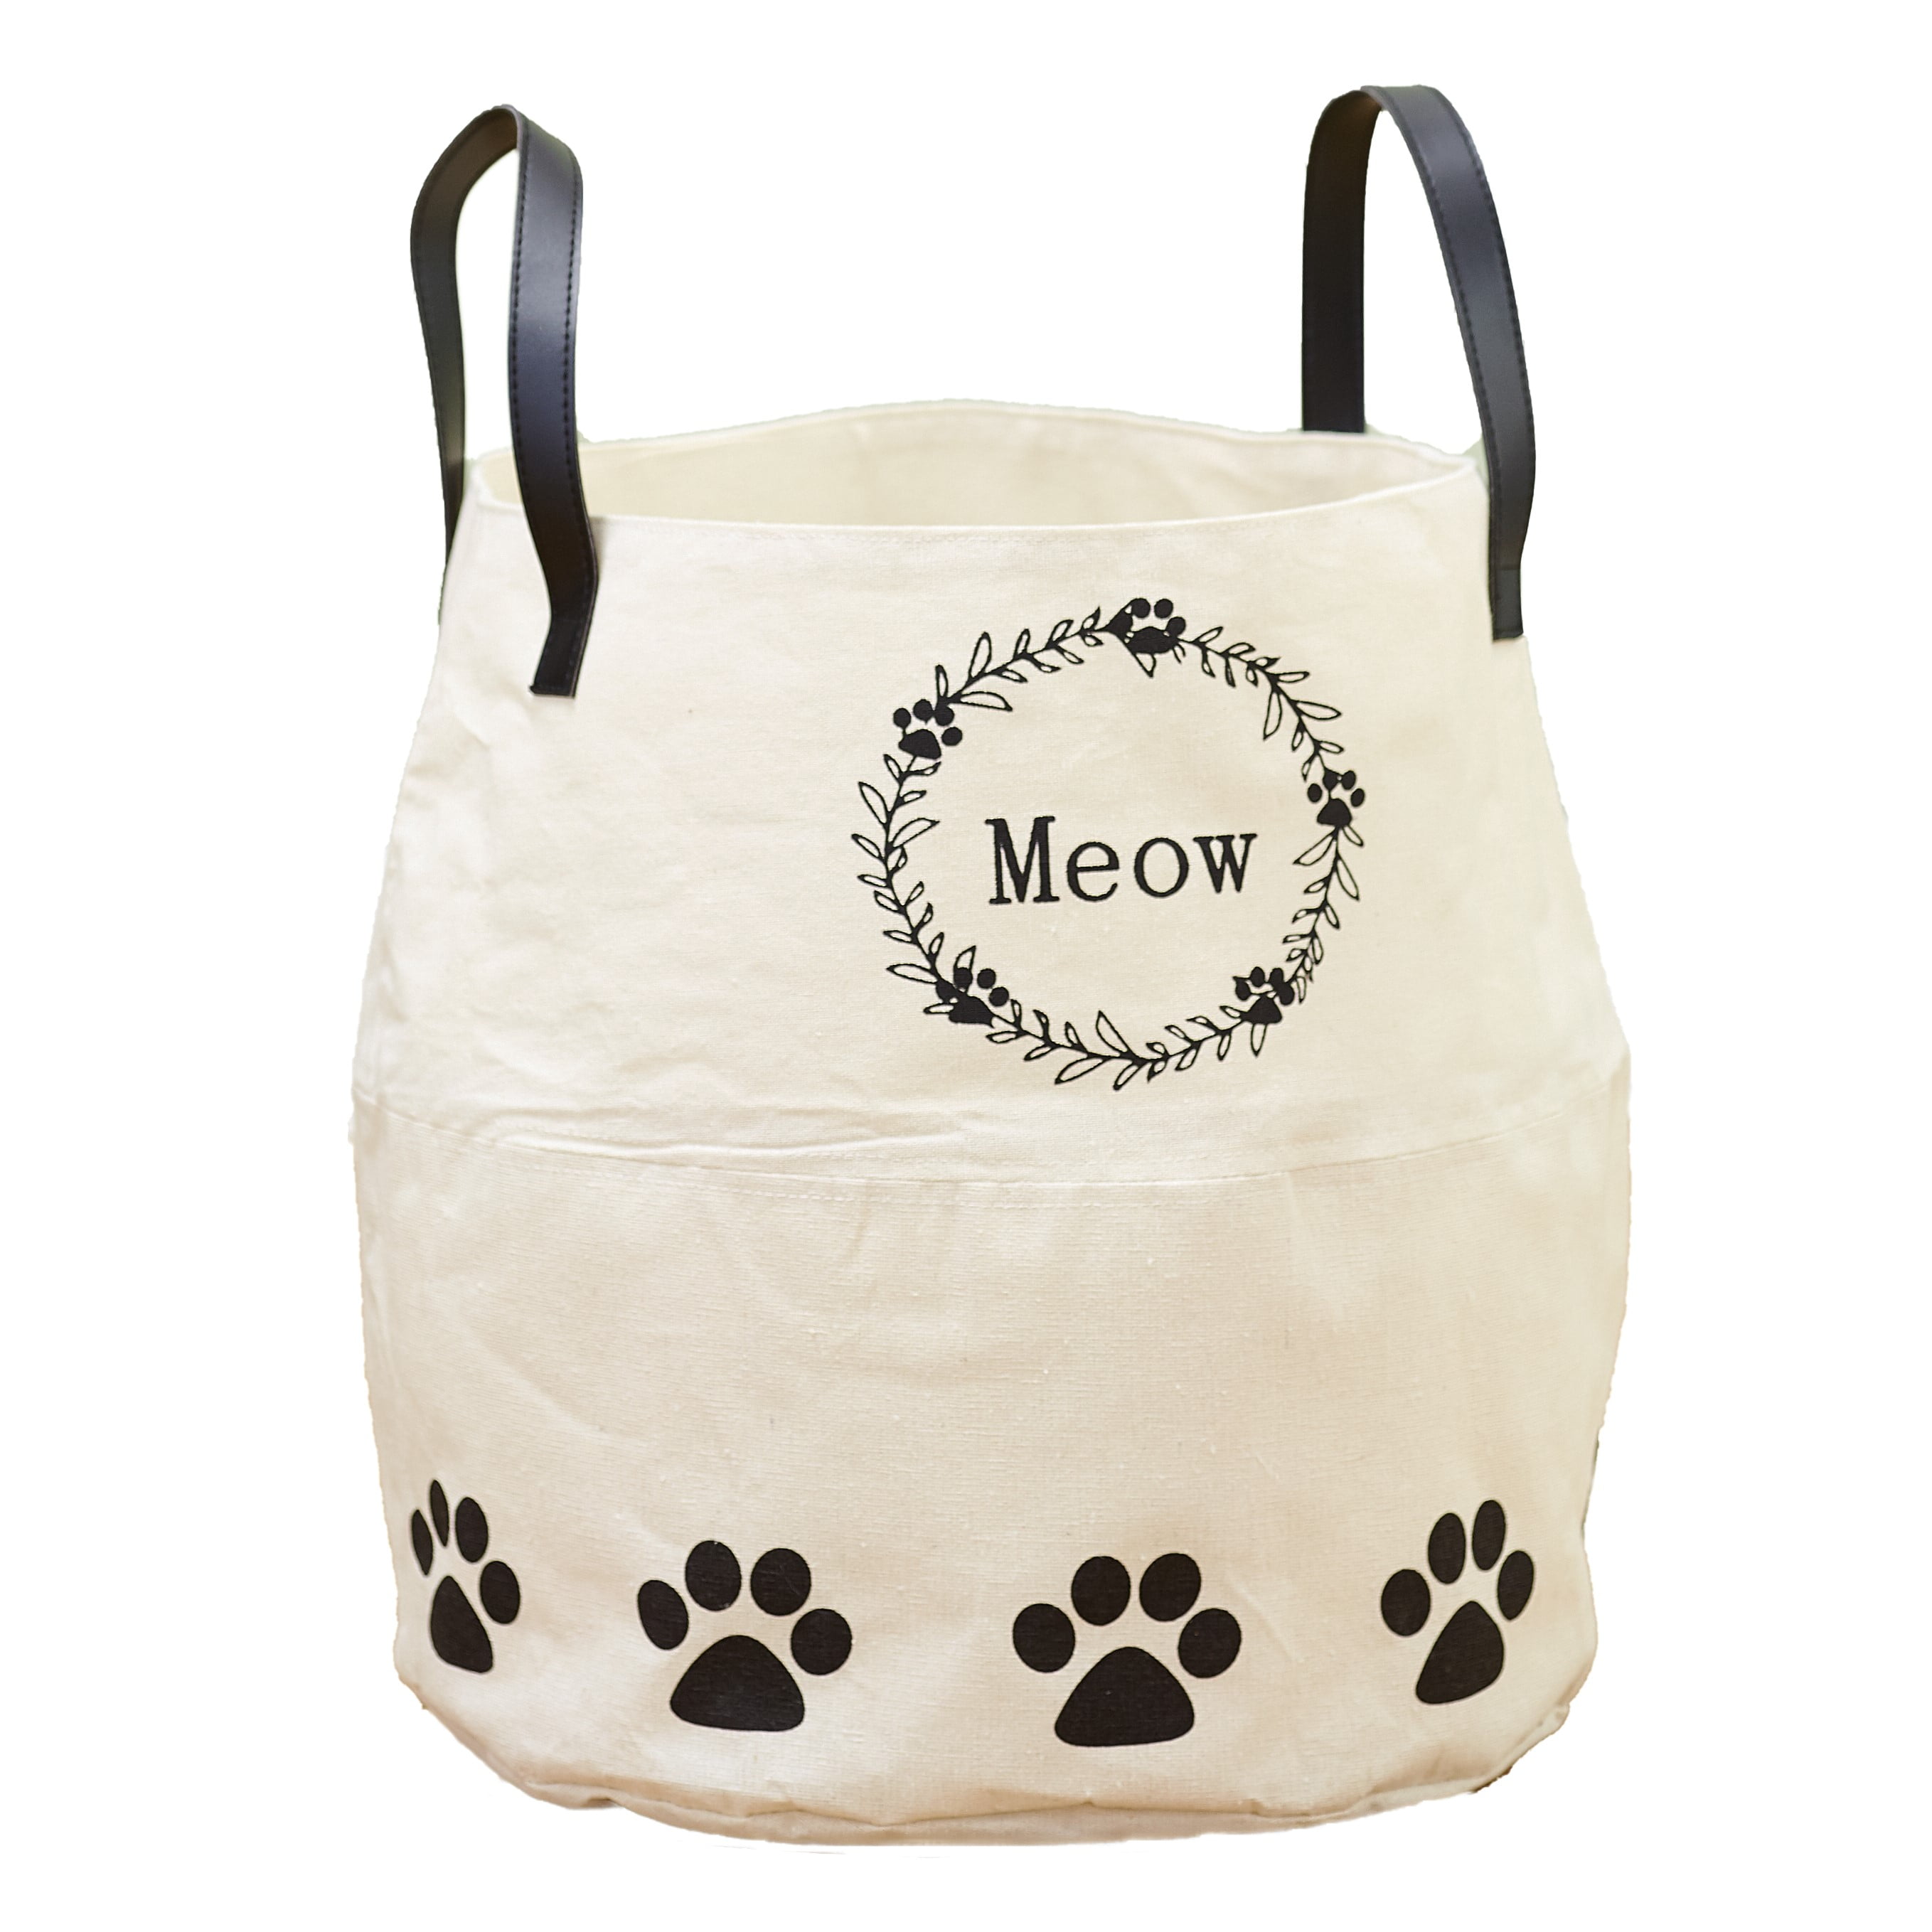 Country Farmhouse Meow Pet Item Storage Bin with Faux Leather Handles